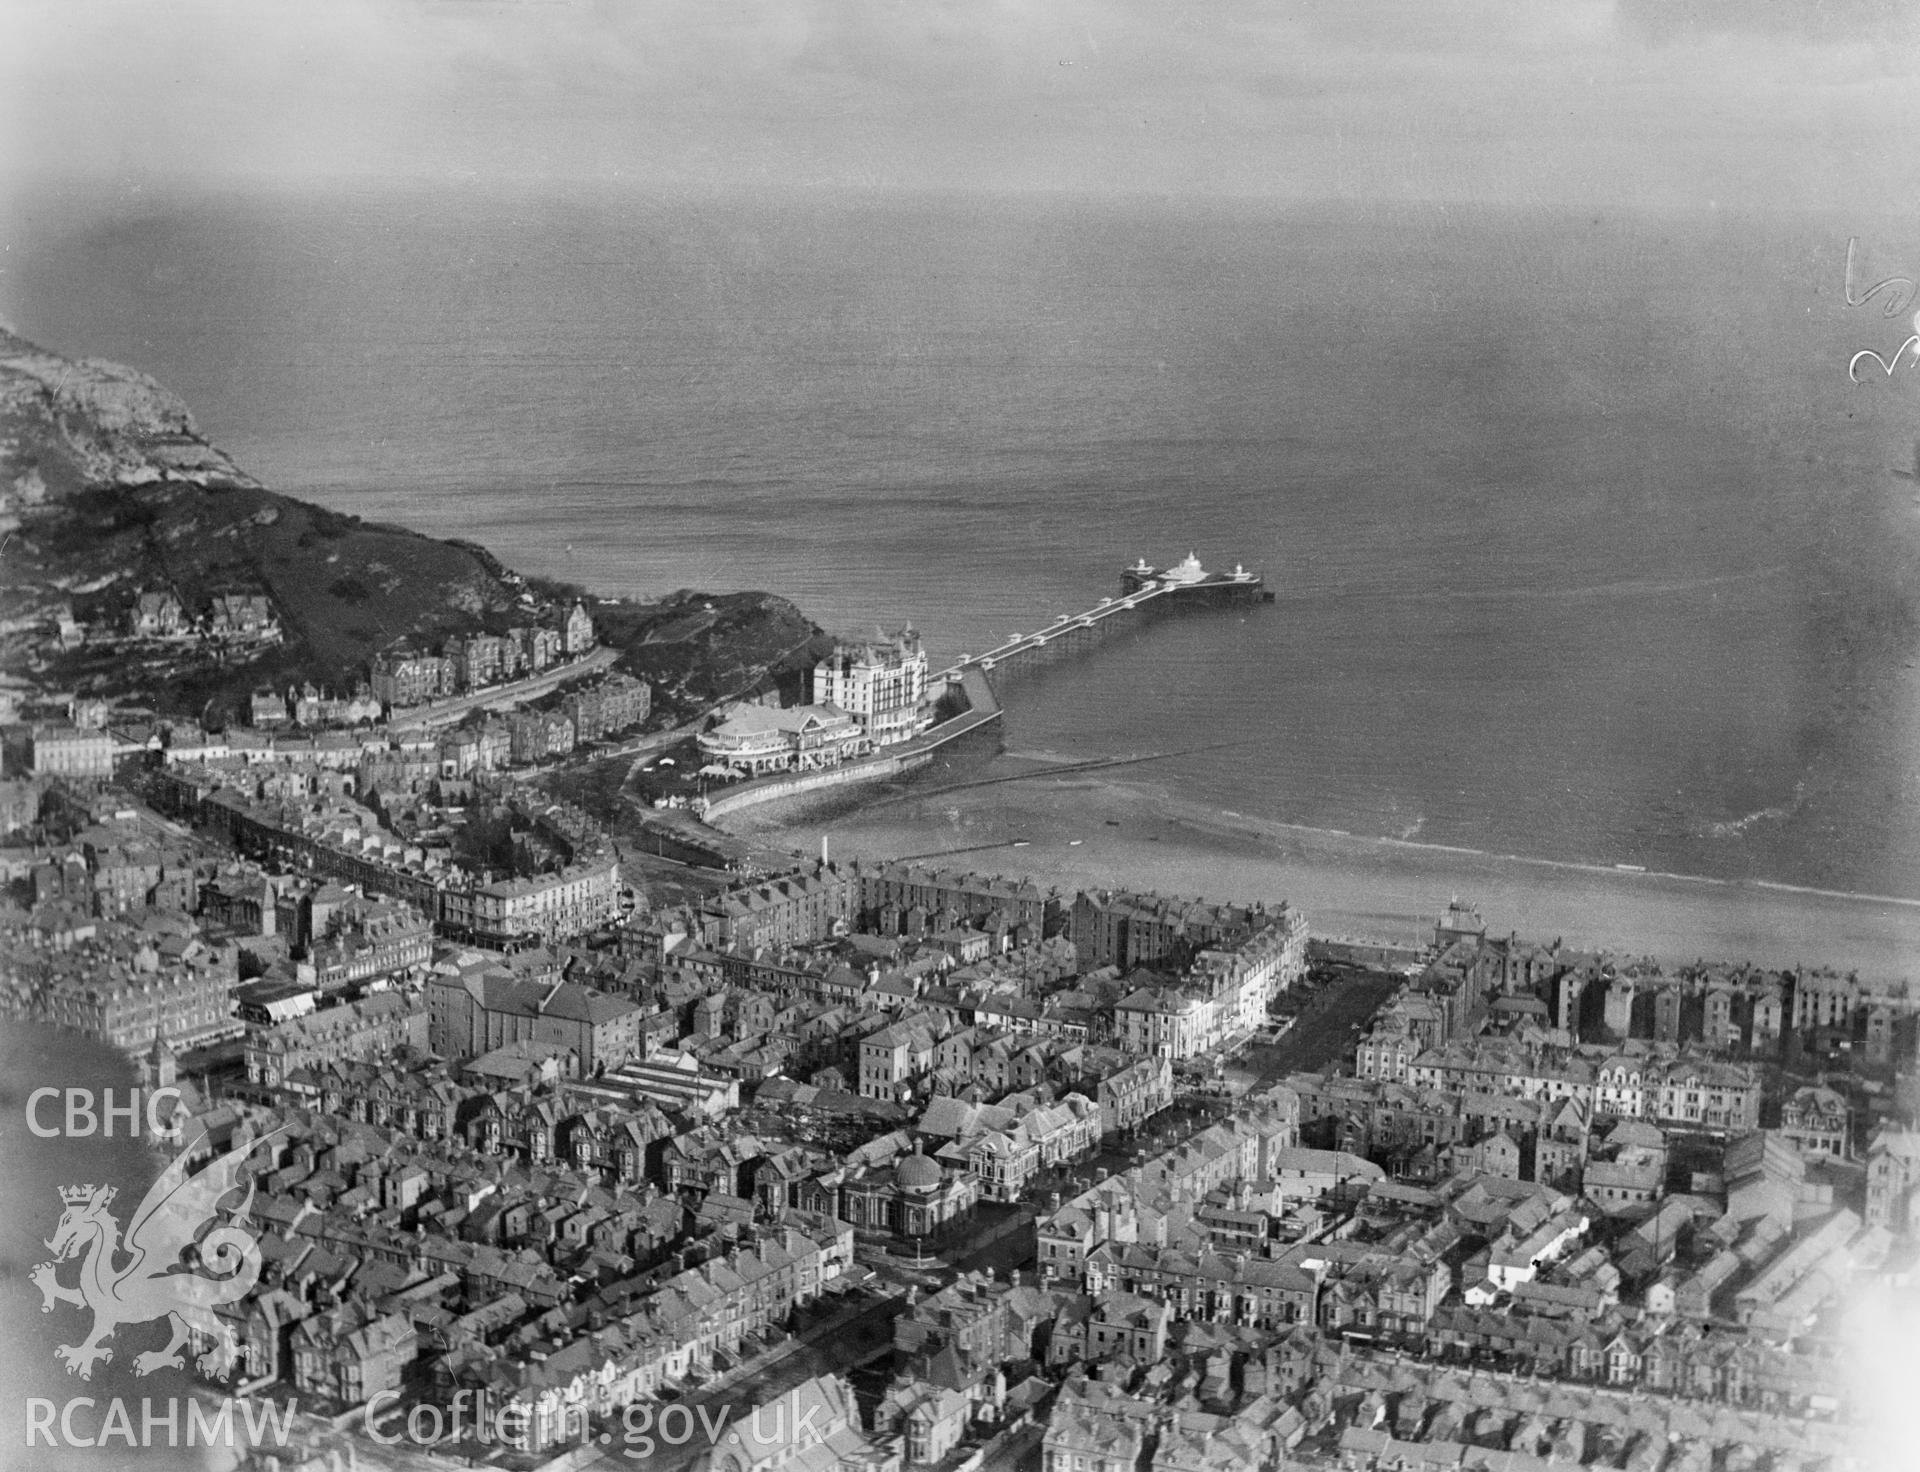 General view of Llandudno showing pier, oblique aerial view. 5?x4? black and white glass plate negative.